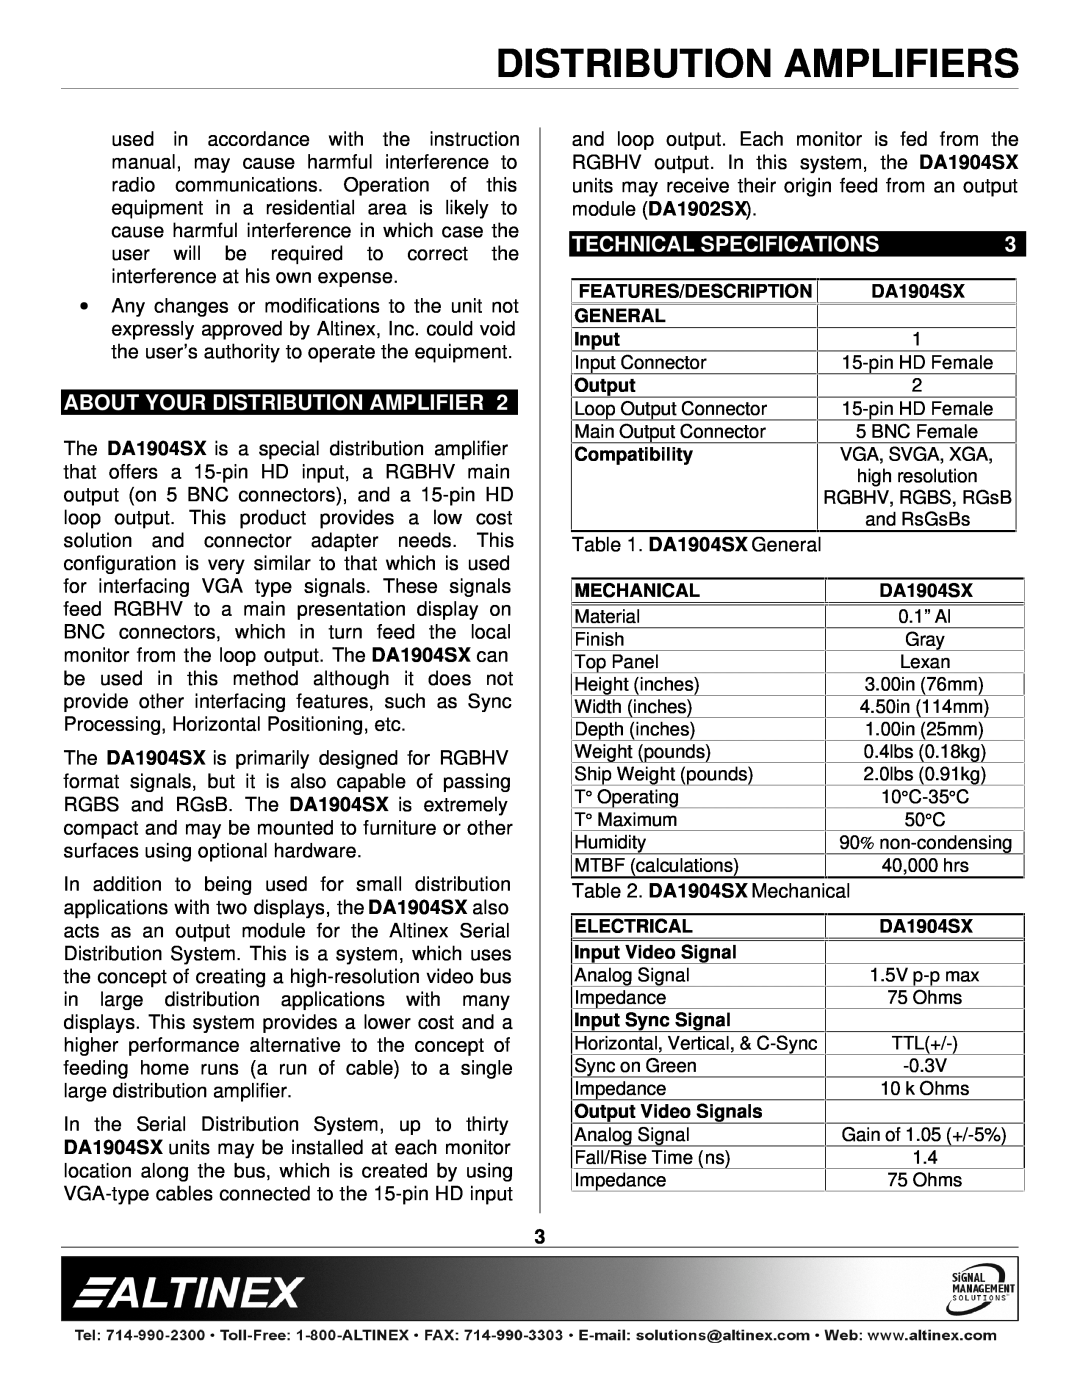 Altinex DA1904SX manual About Your Distribution Amplifier, Technical Specifications, Distribution Amplifiers 